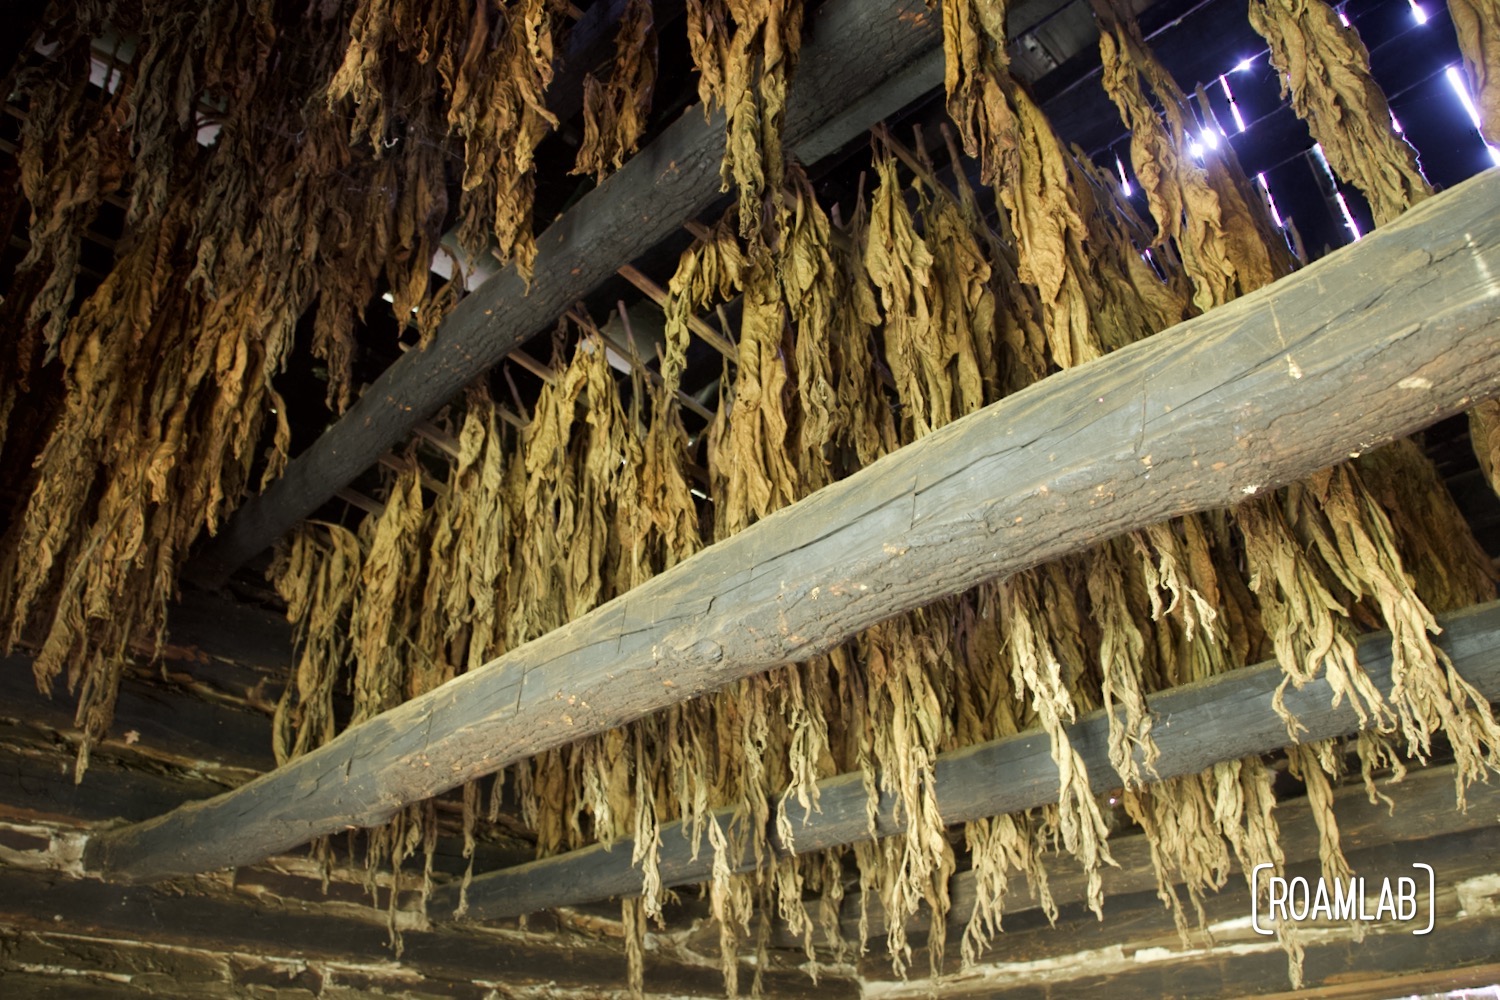 Drying tobacco in the rafters of a Tobacco Barn